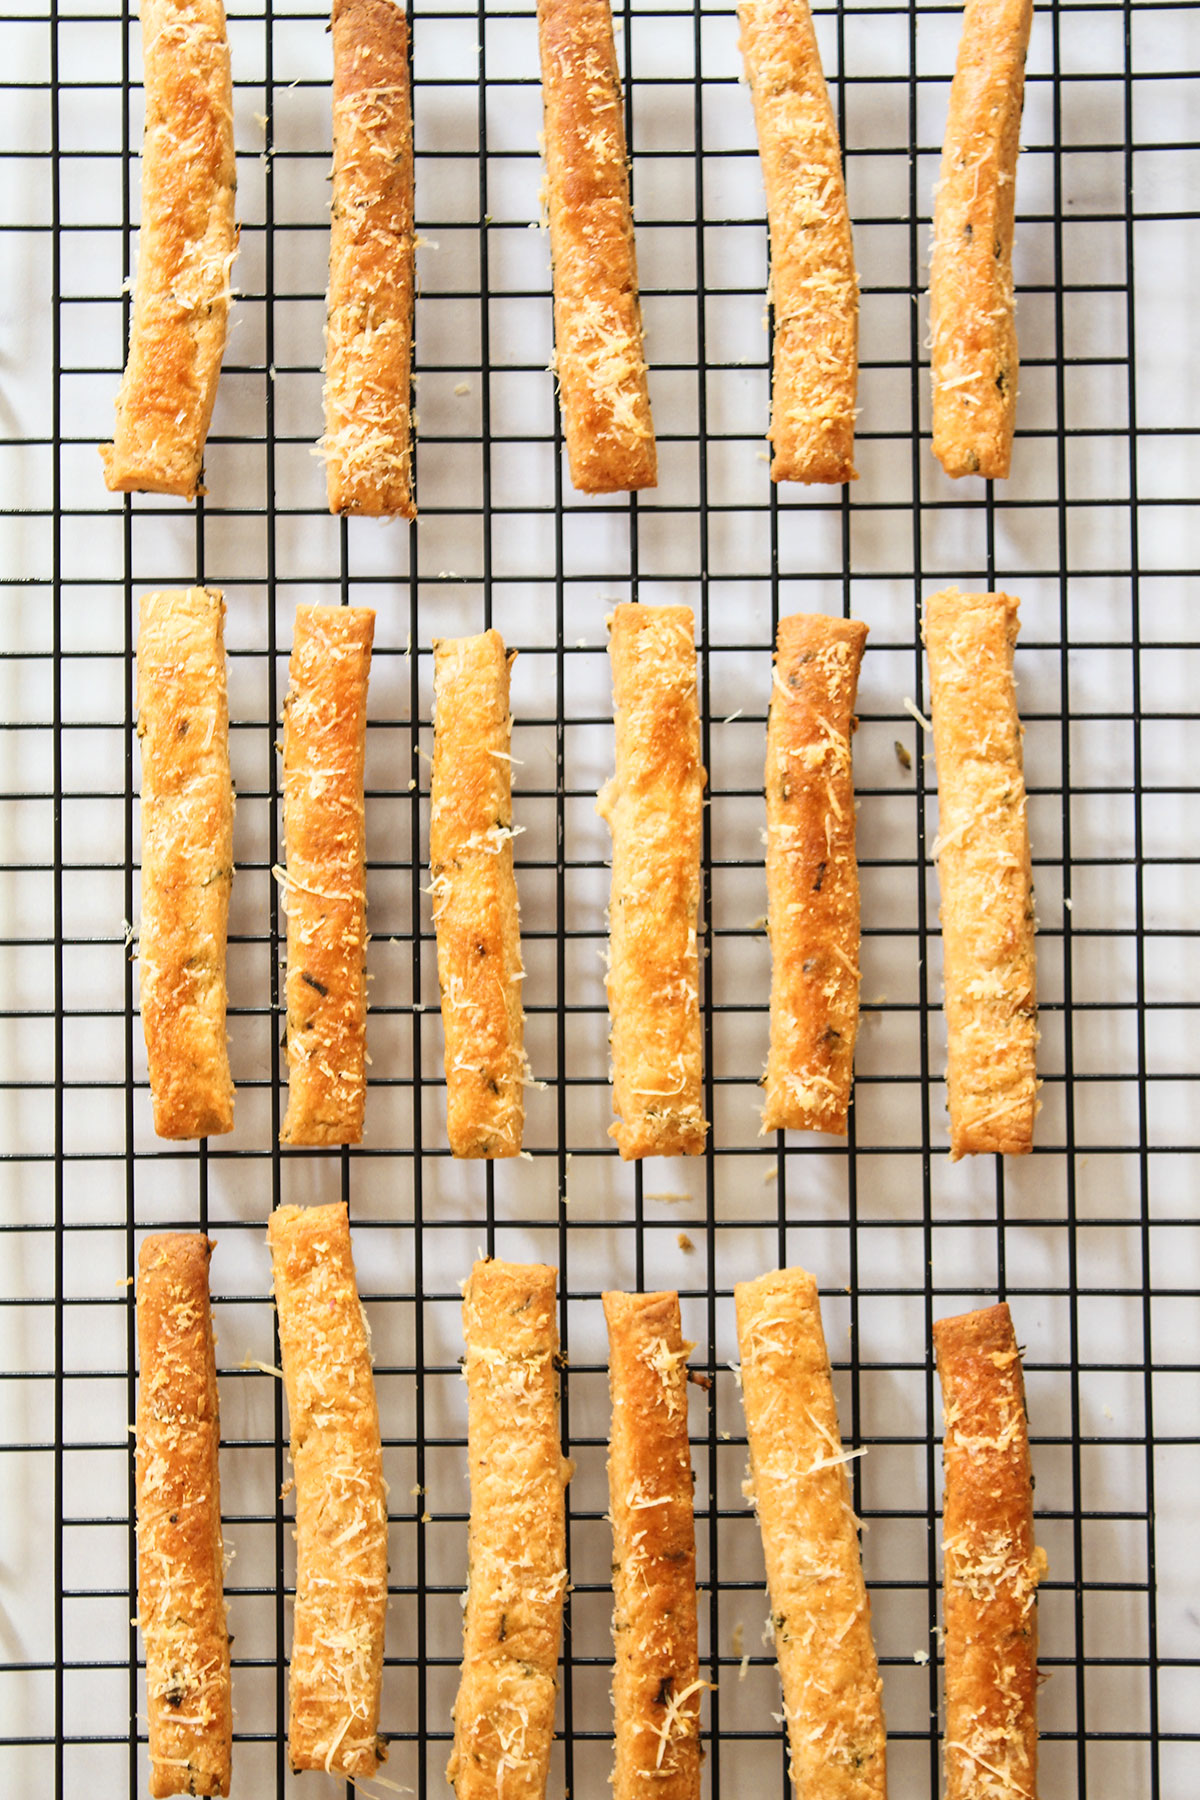 The baked cheese straws cooling on a wire rack.